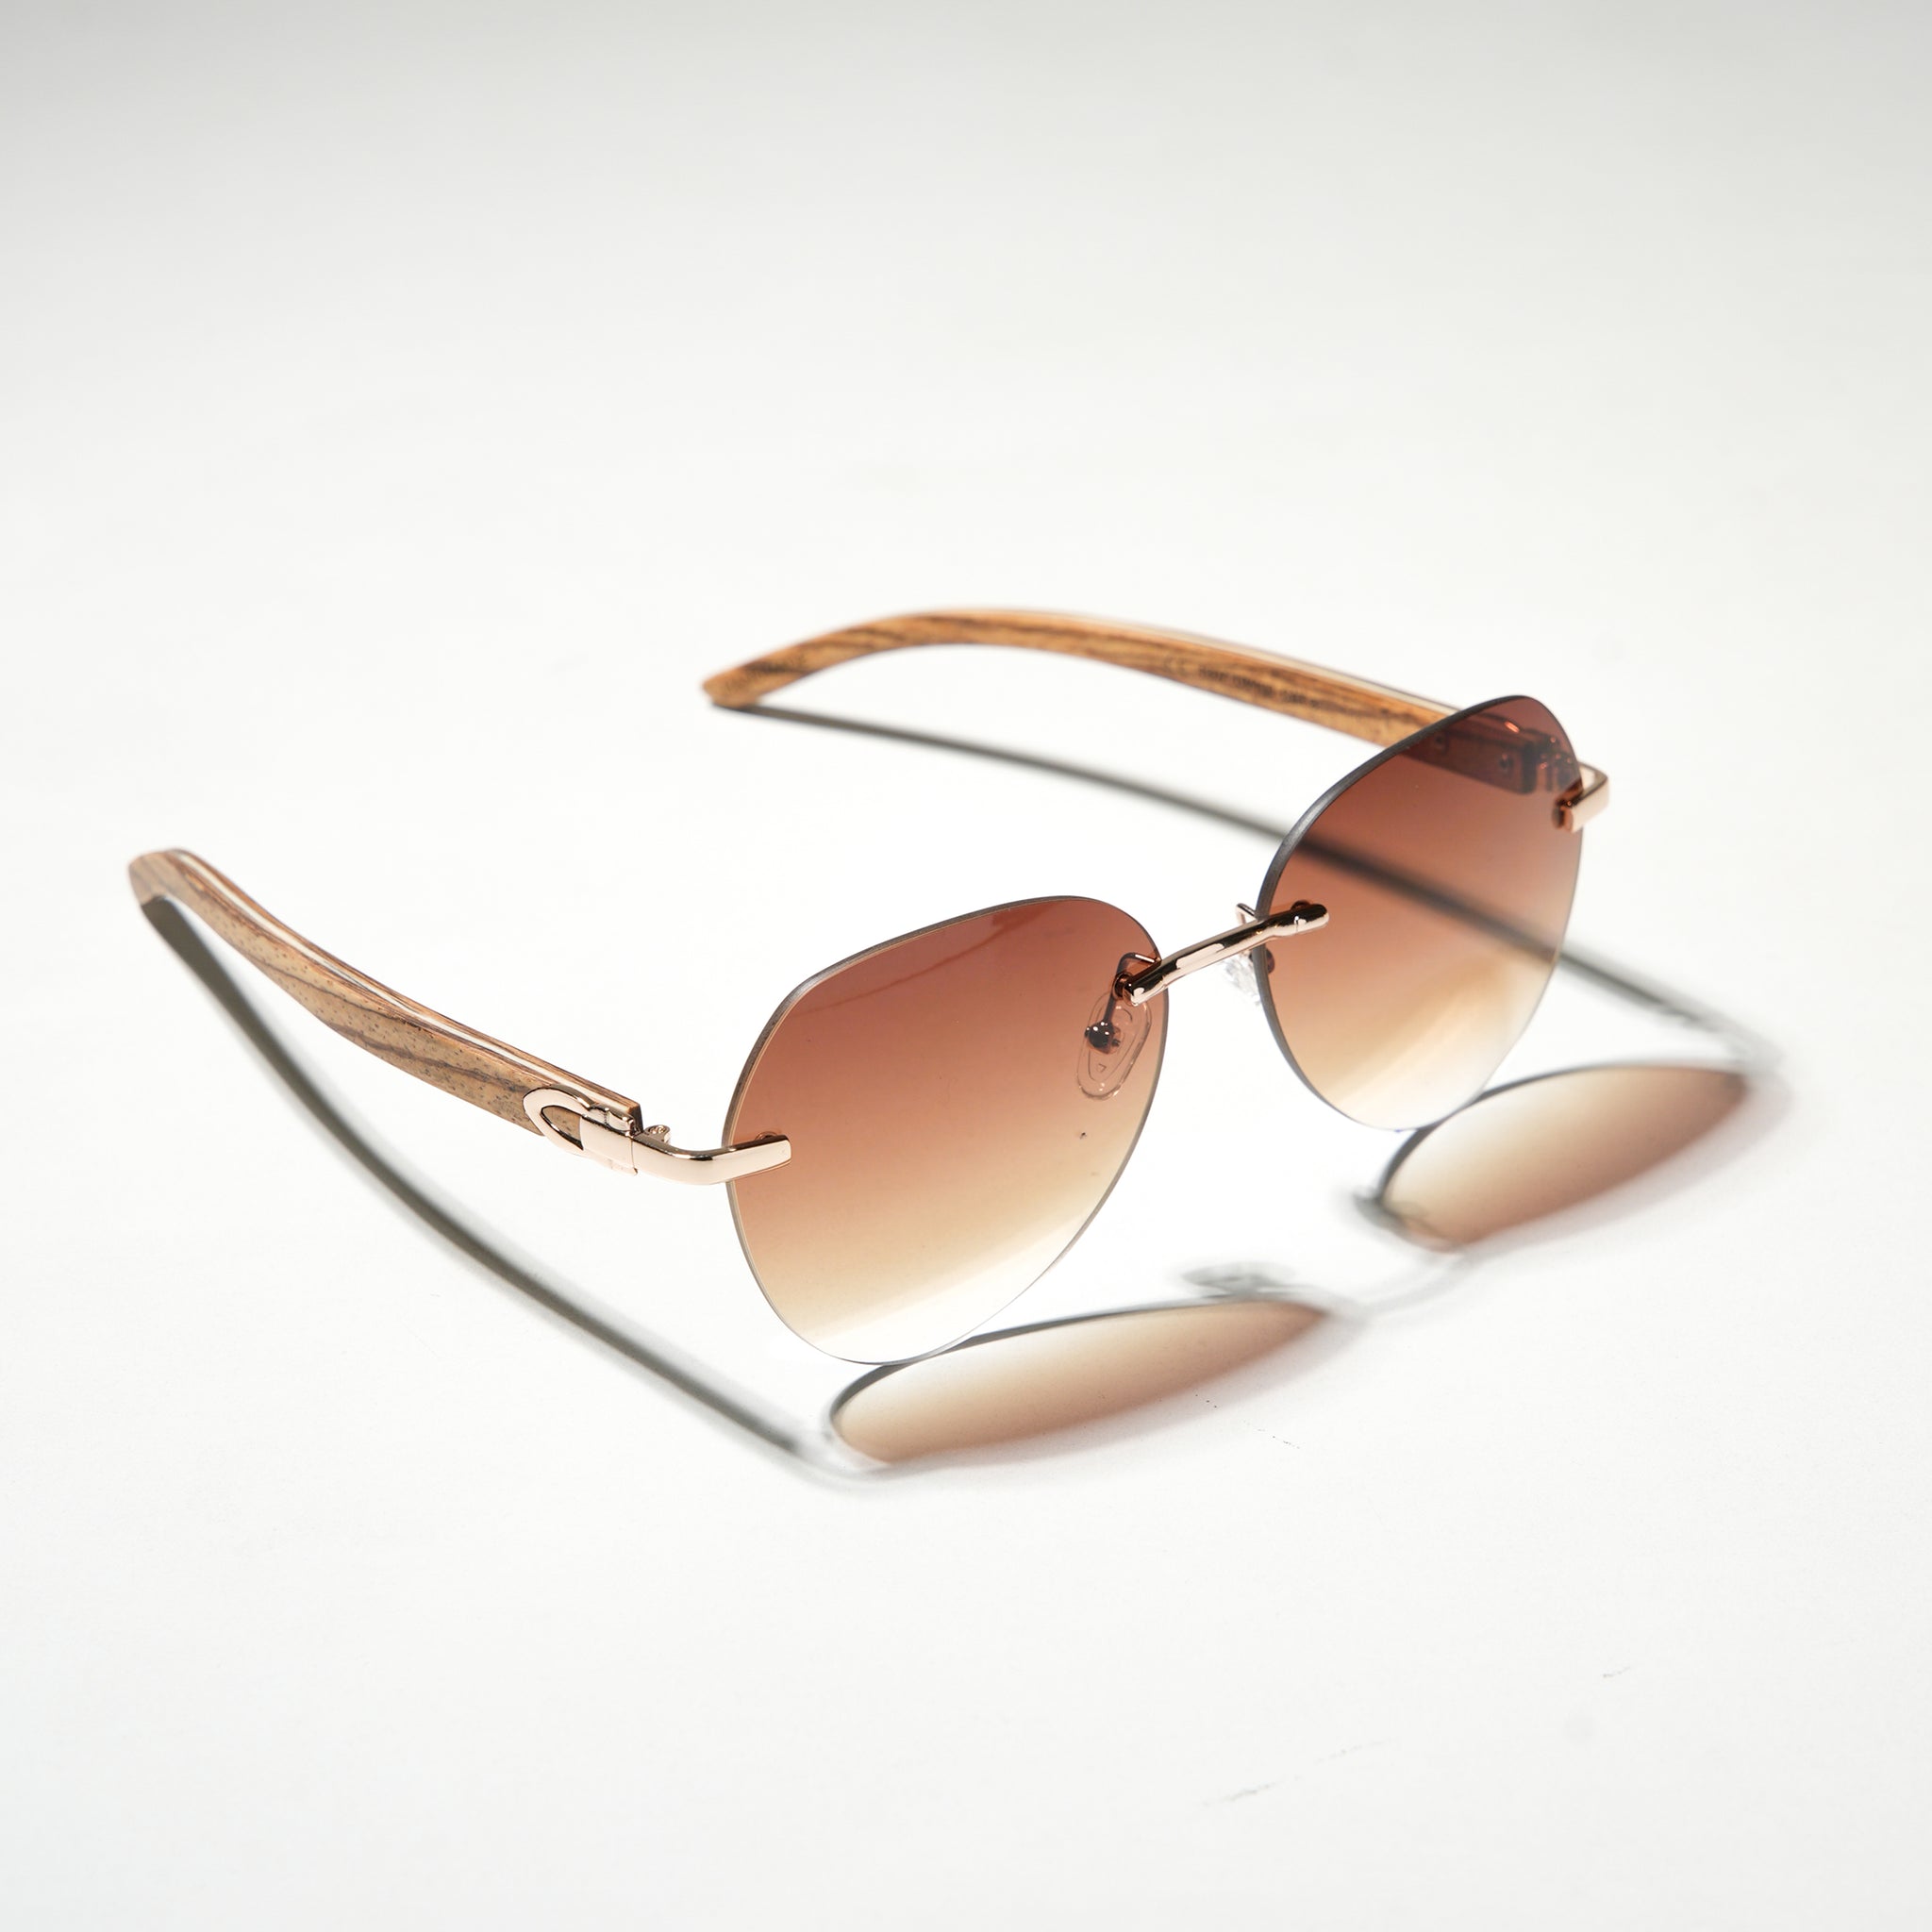 Chokore Rimless Oversized Sunglasses with Wooden Temple (Brown)